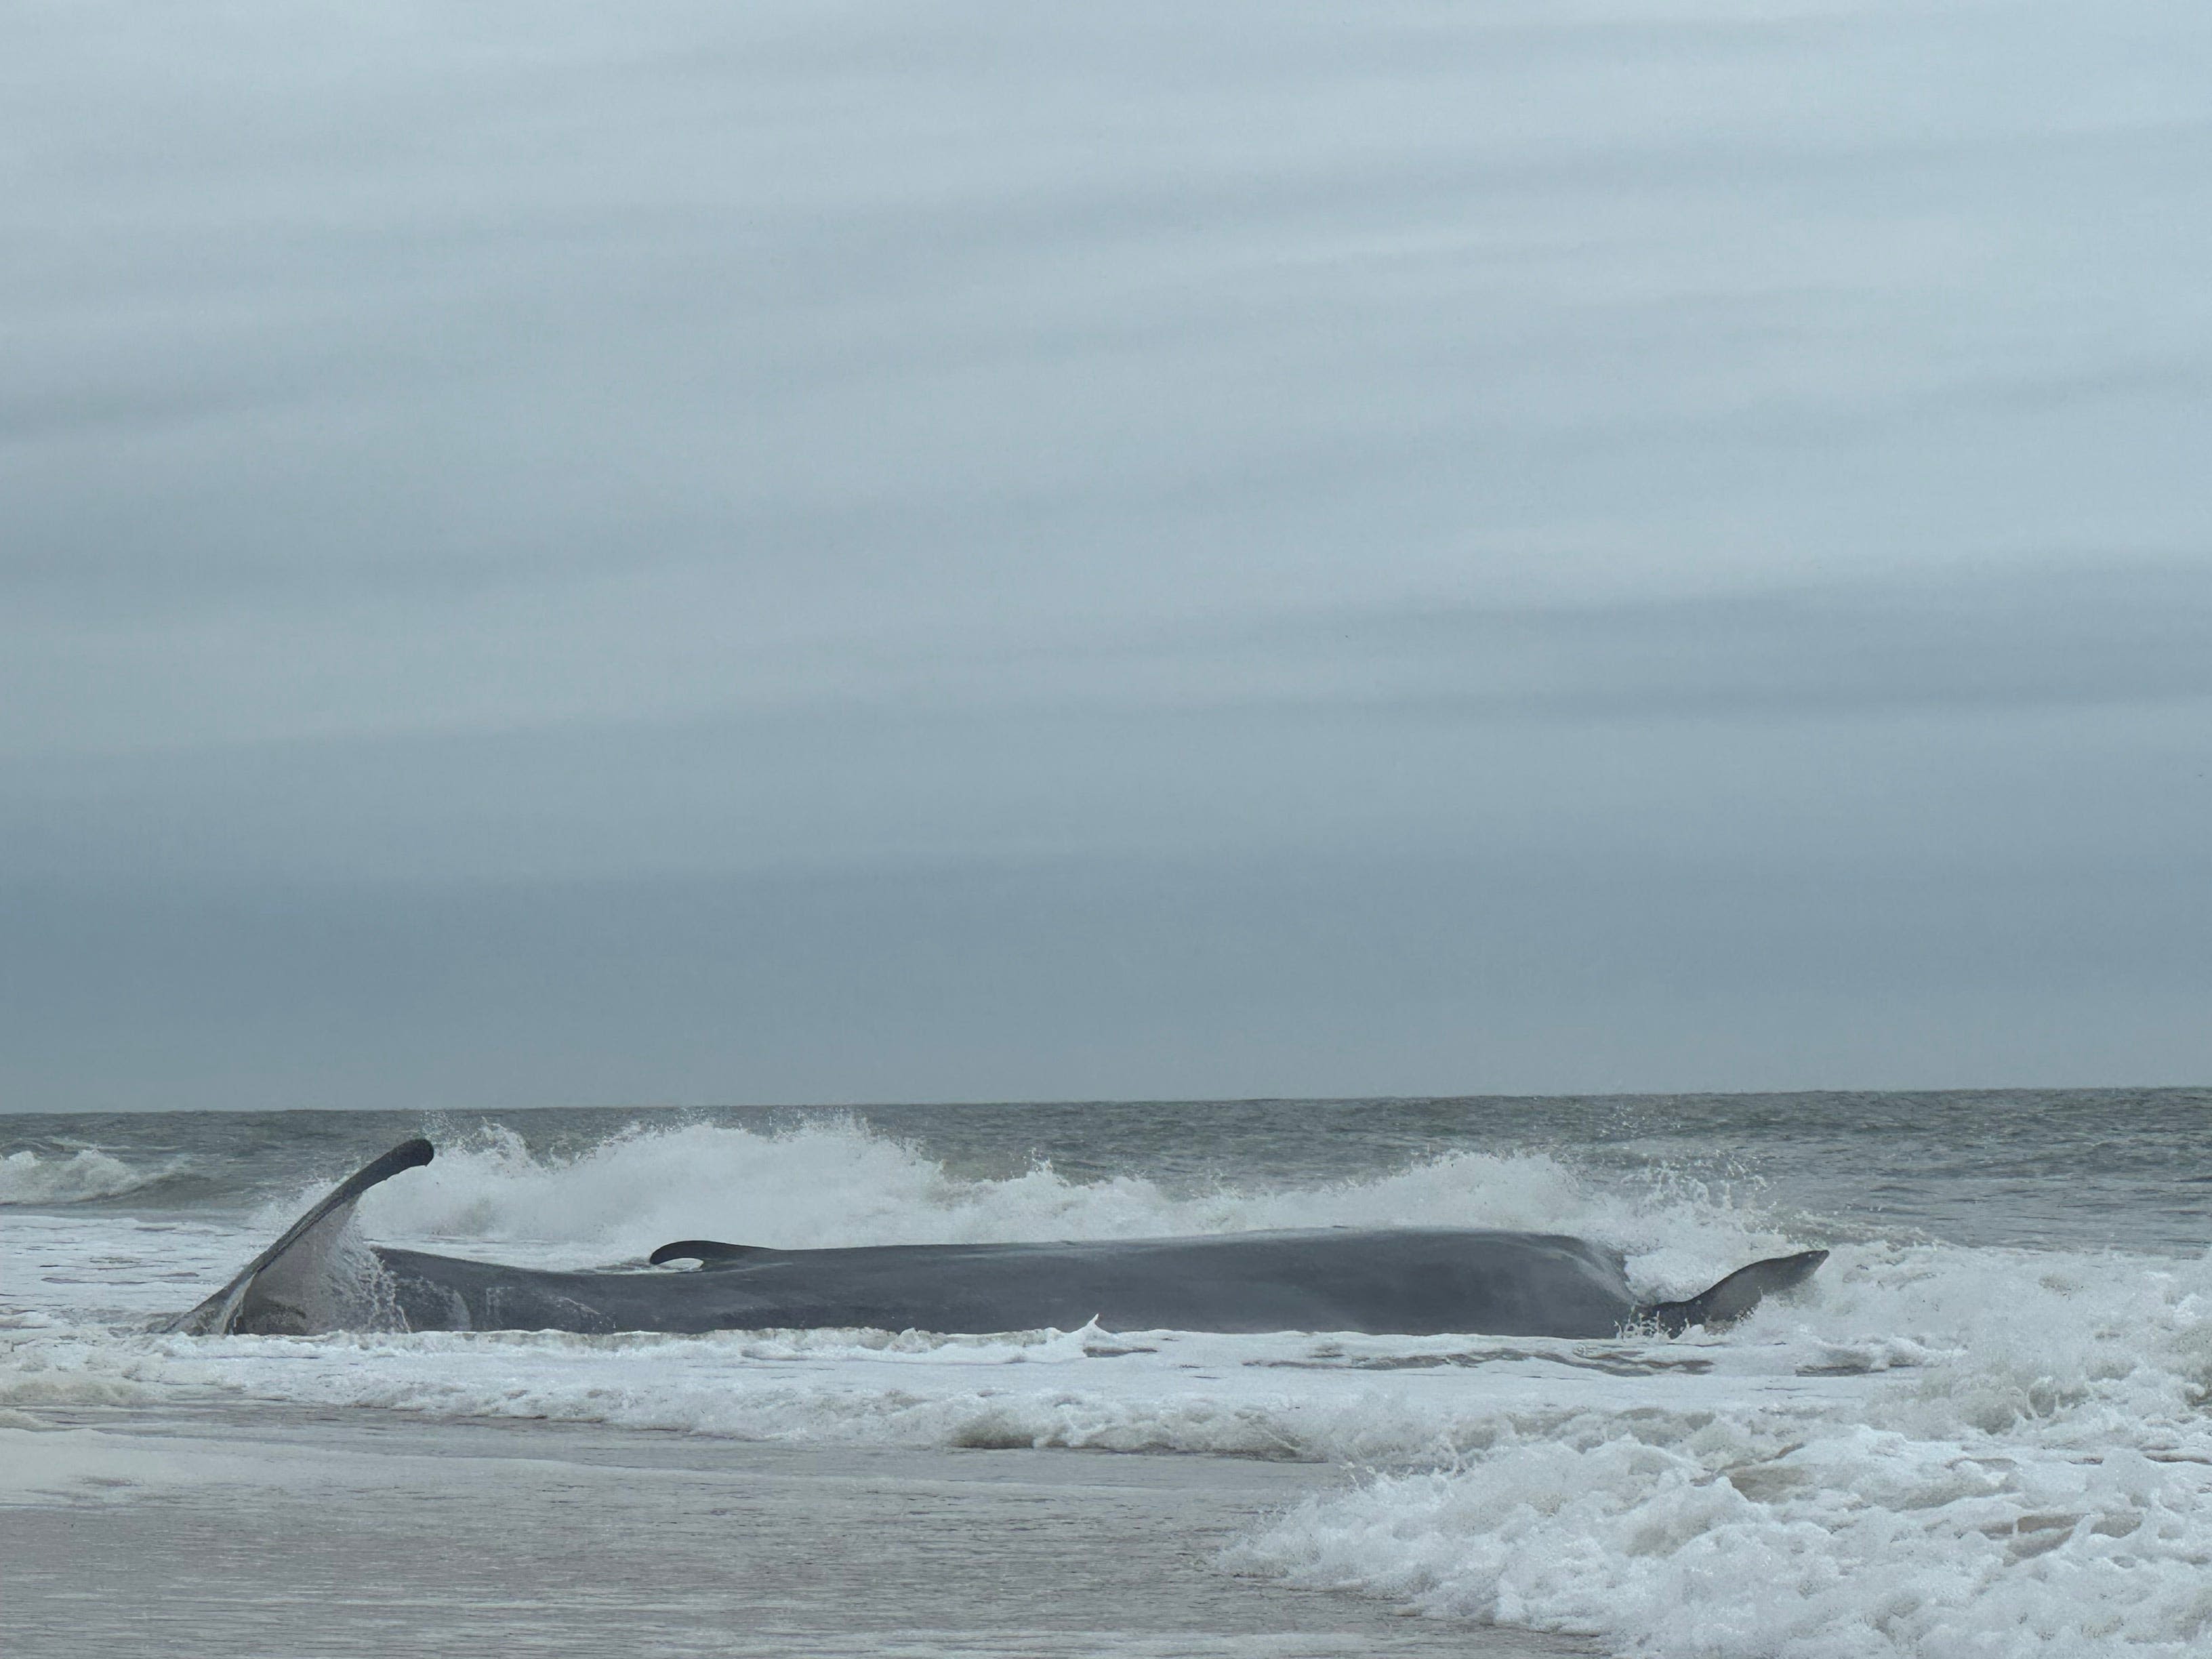 50-foot fin whale beached, likely dying at Delaware Seashore State Park on Sunday